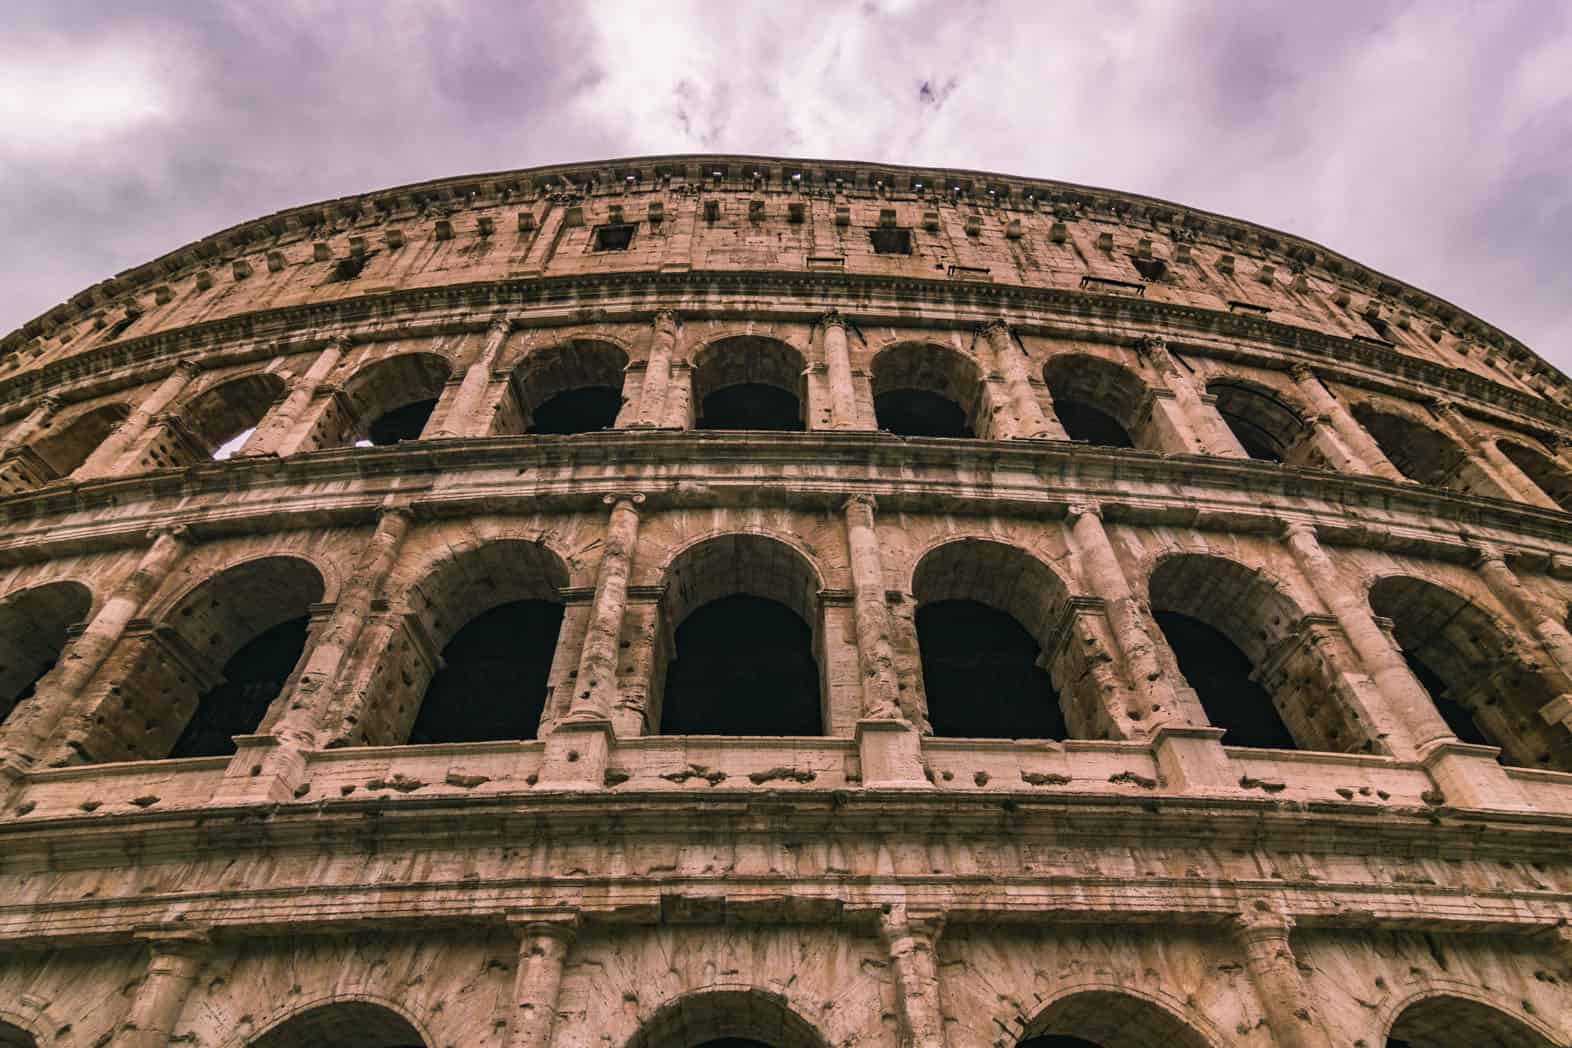 A POV looking up at the huge colosseum in Rome, Italy.